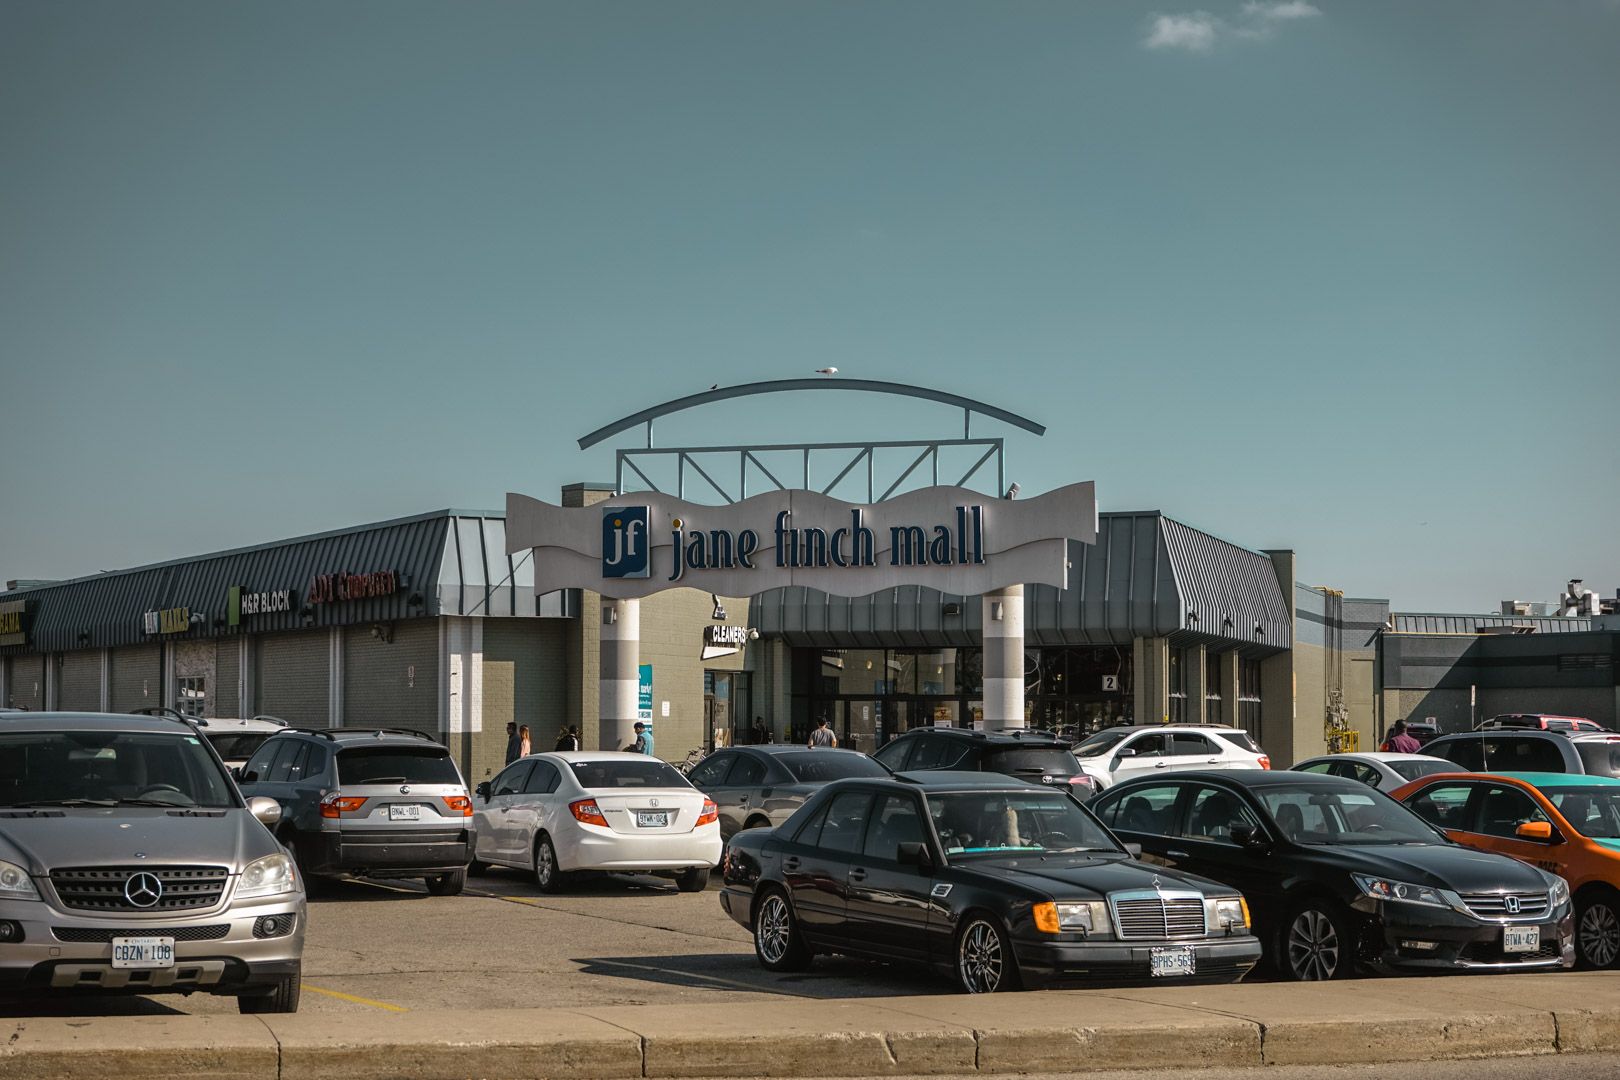 travel agency jane and finch mall